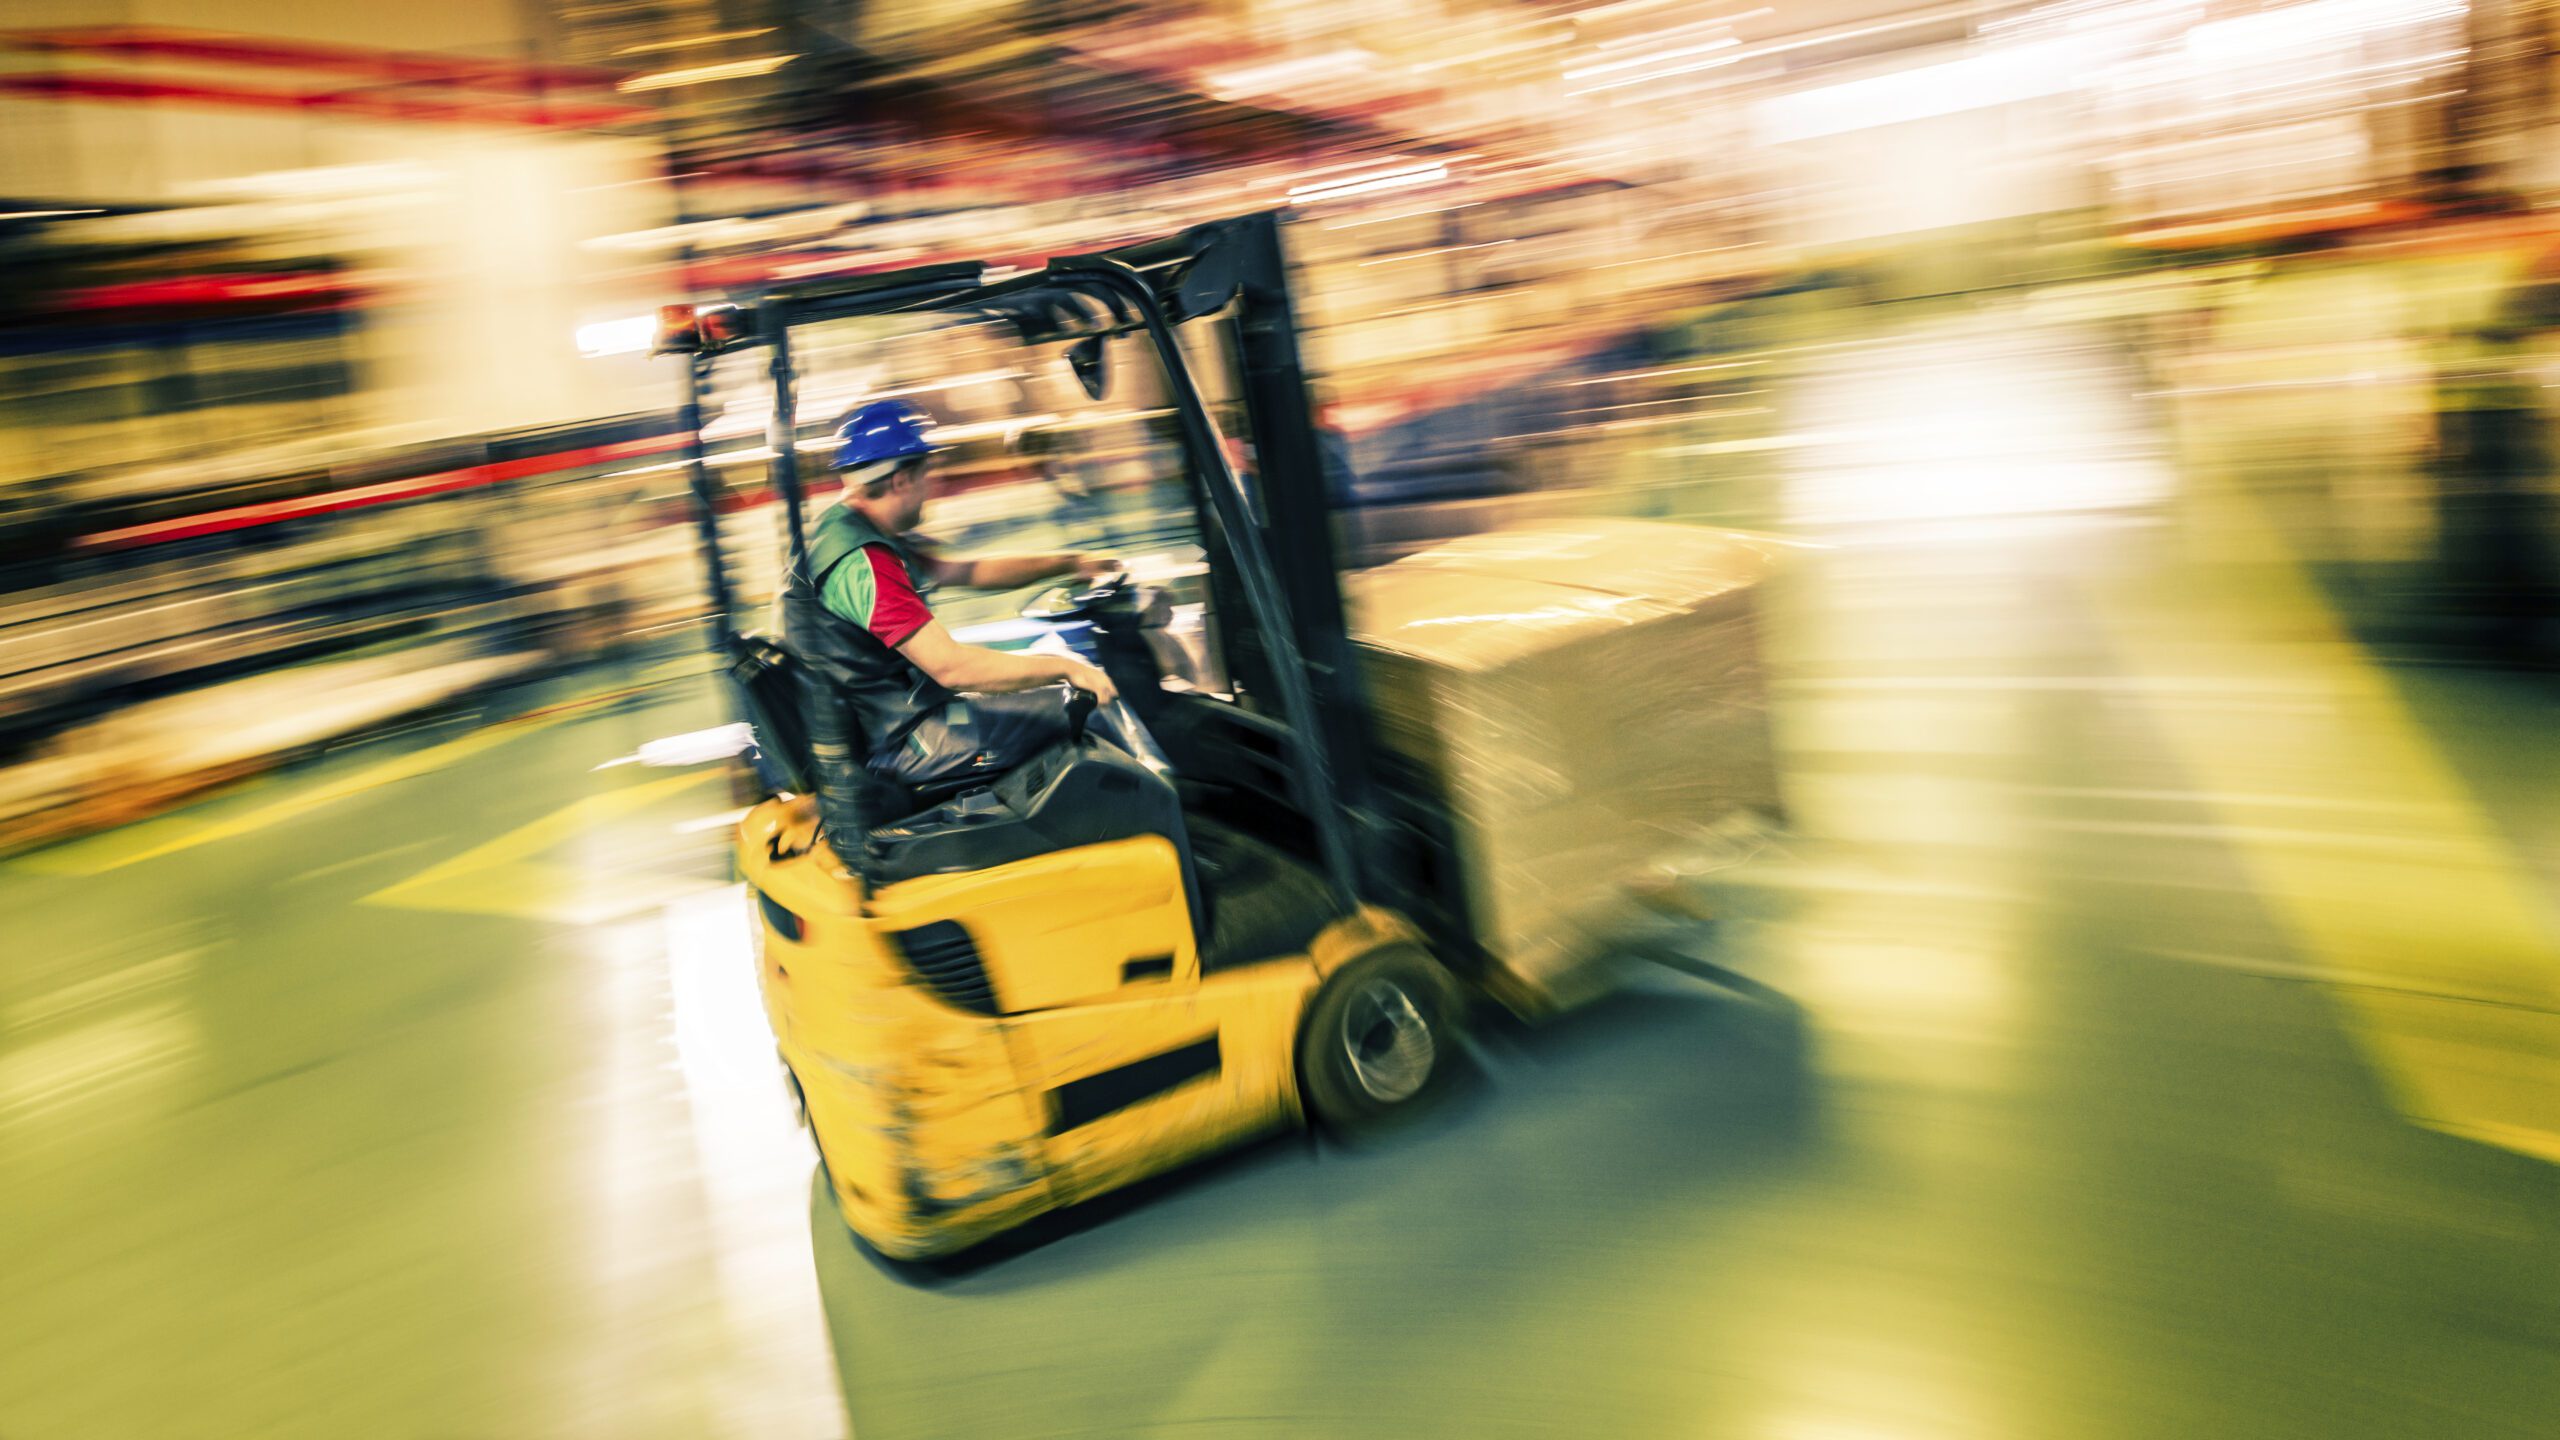 Five Reasons Blind Spots cause so many accidents in warehouses